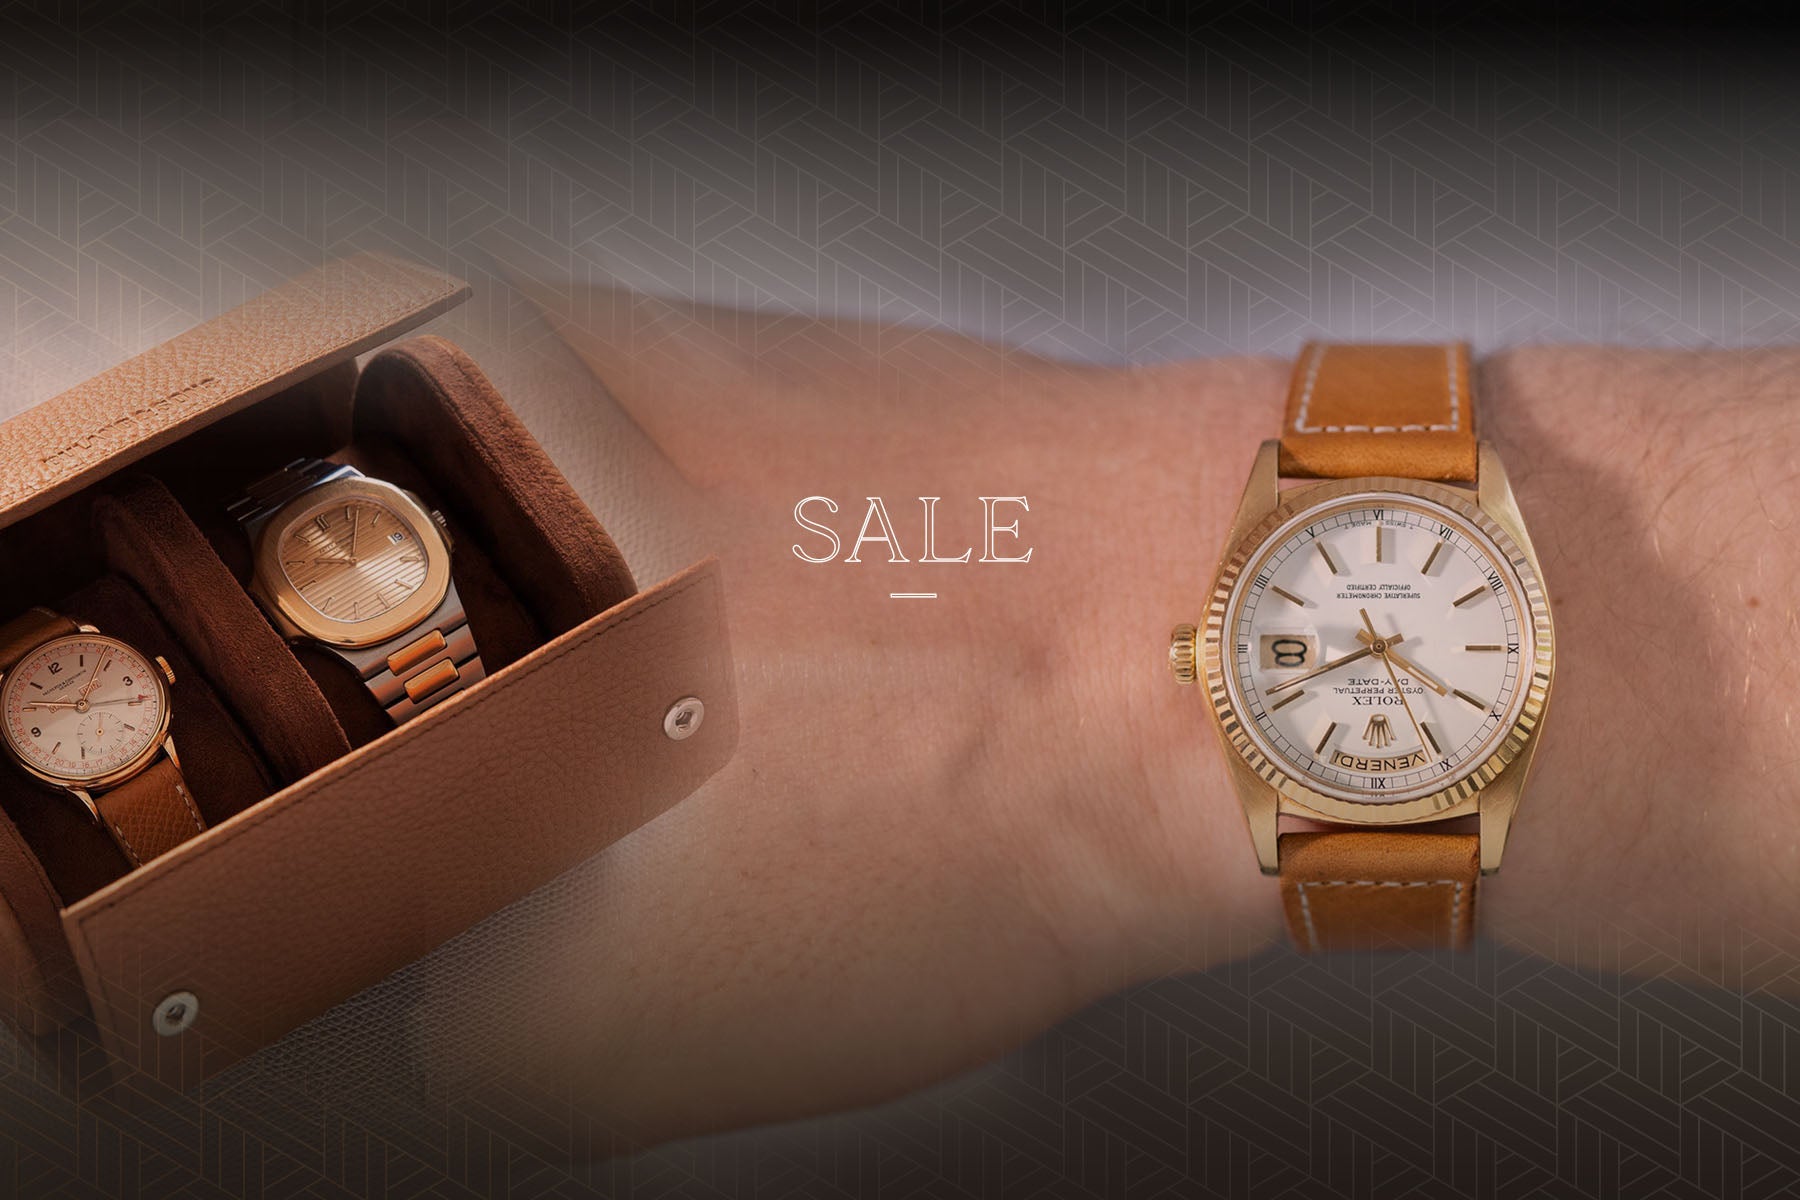 OUR HOT SUMMER WATCH DEALS HAVE ENDED